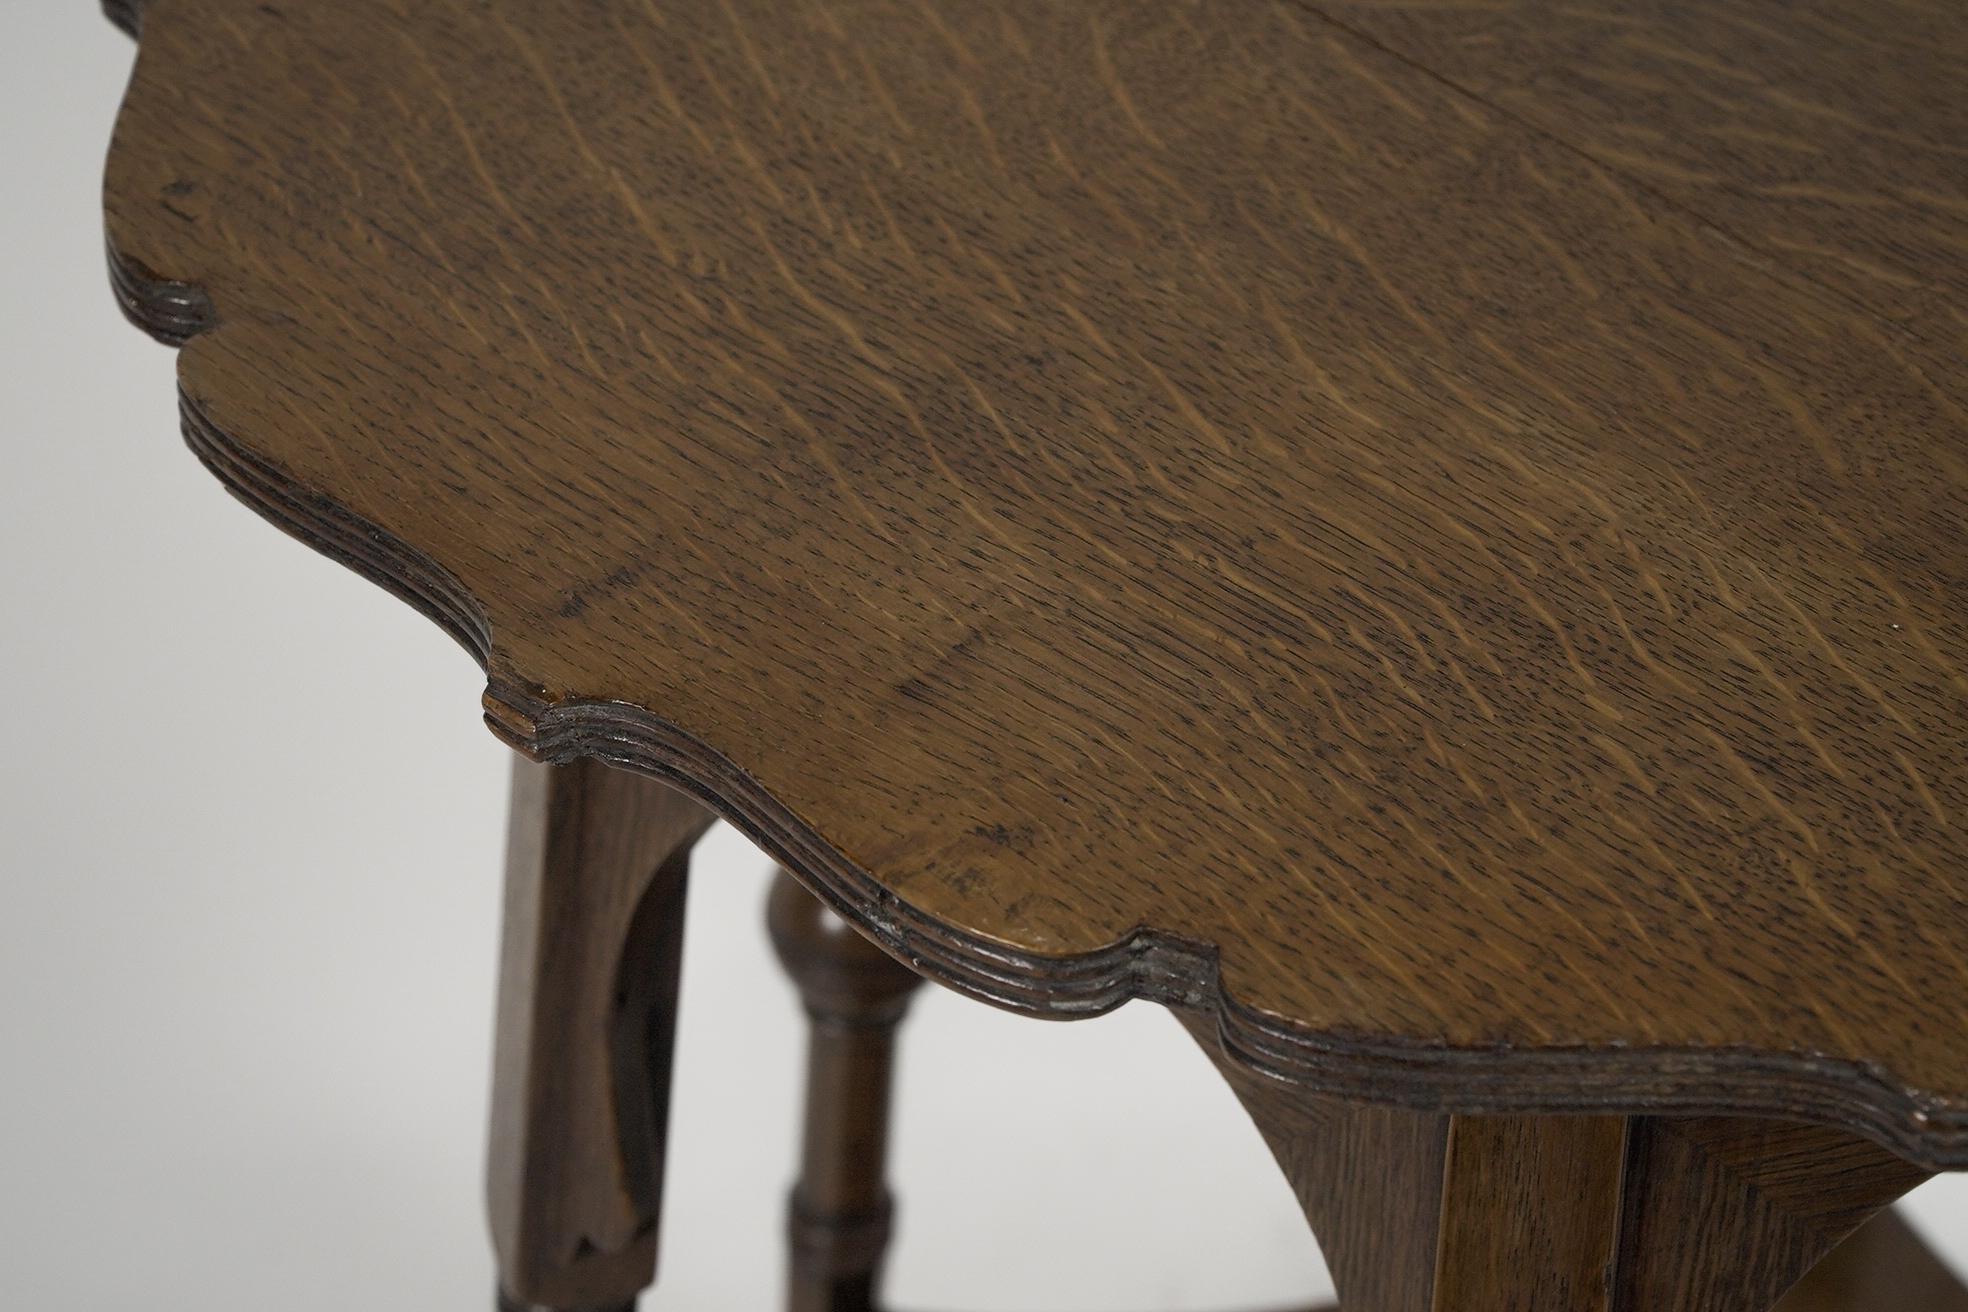 English Liberty and Co. Oak side or occasional table with a shaped top and molded edges